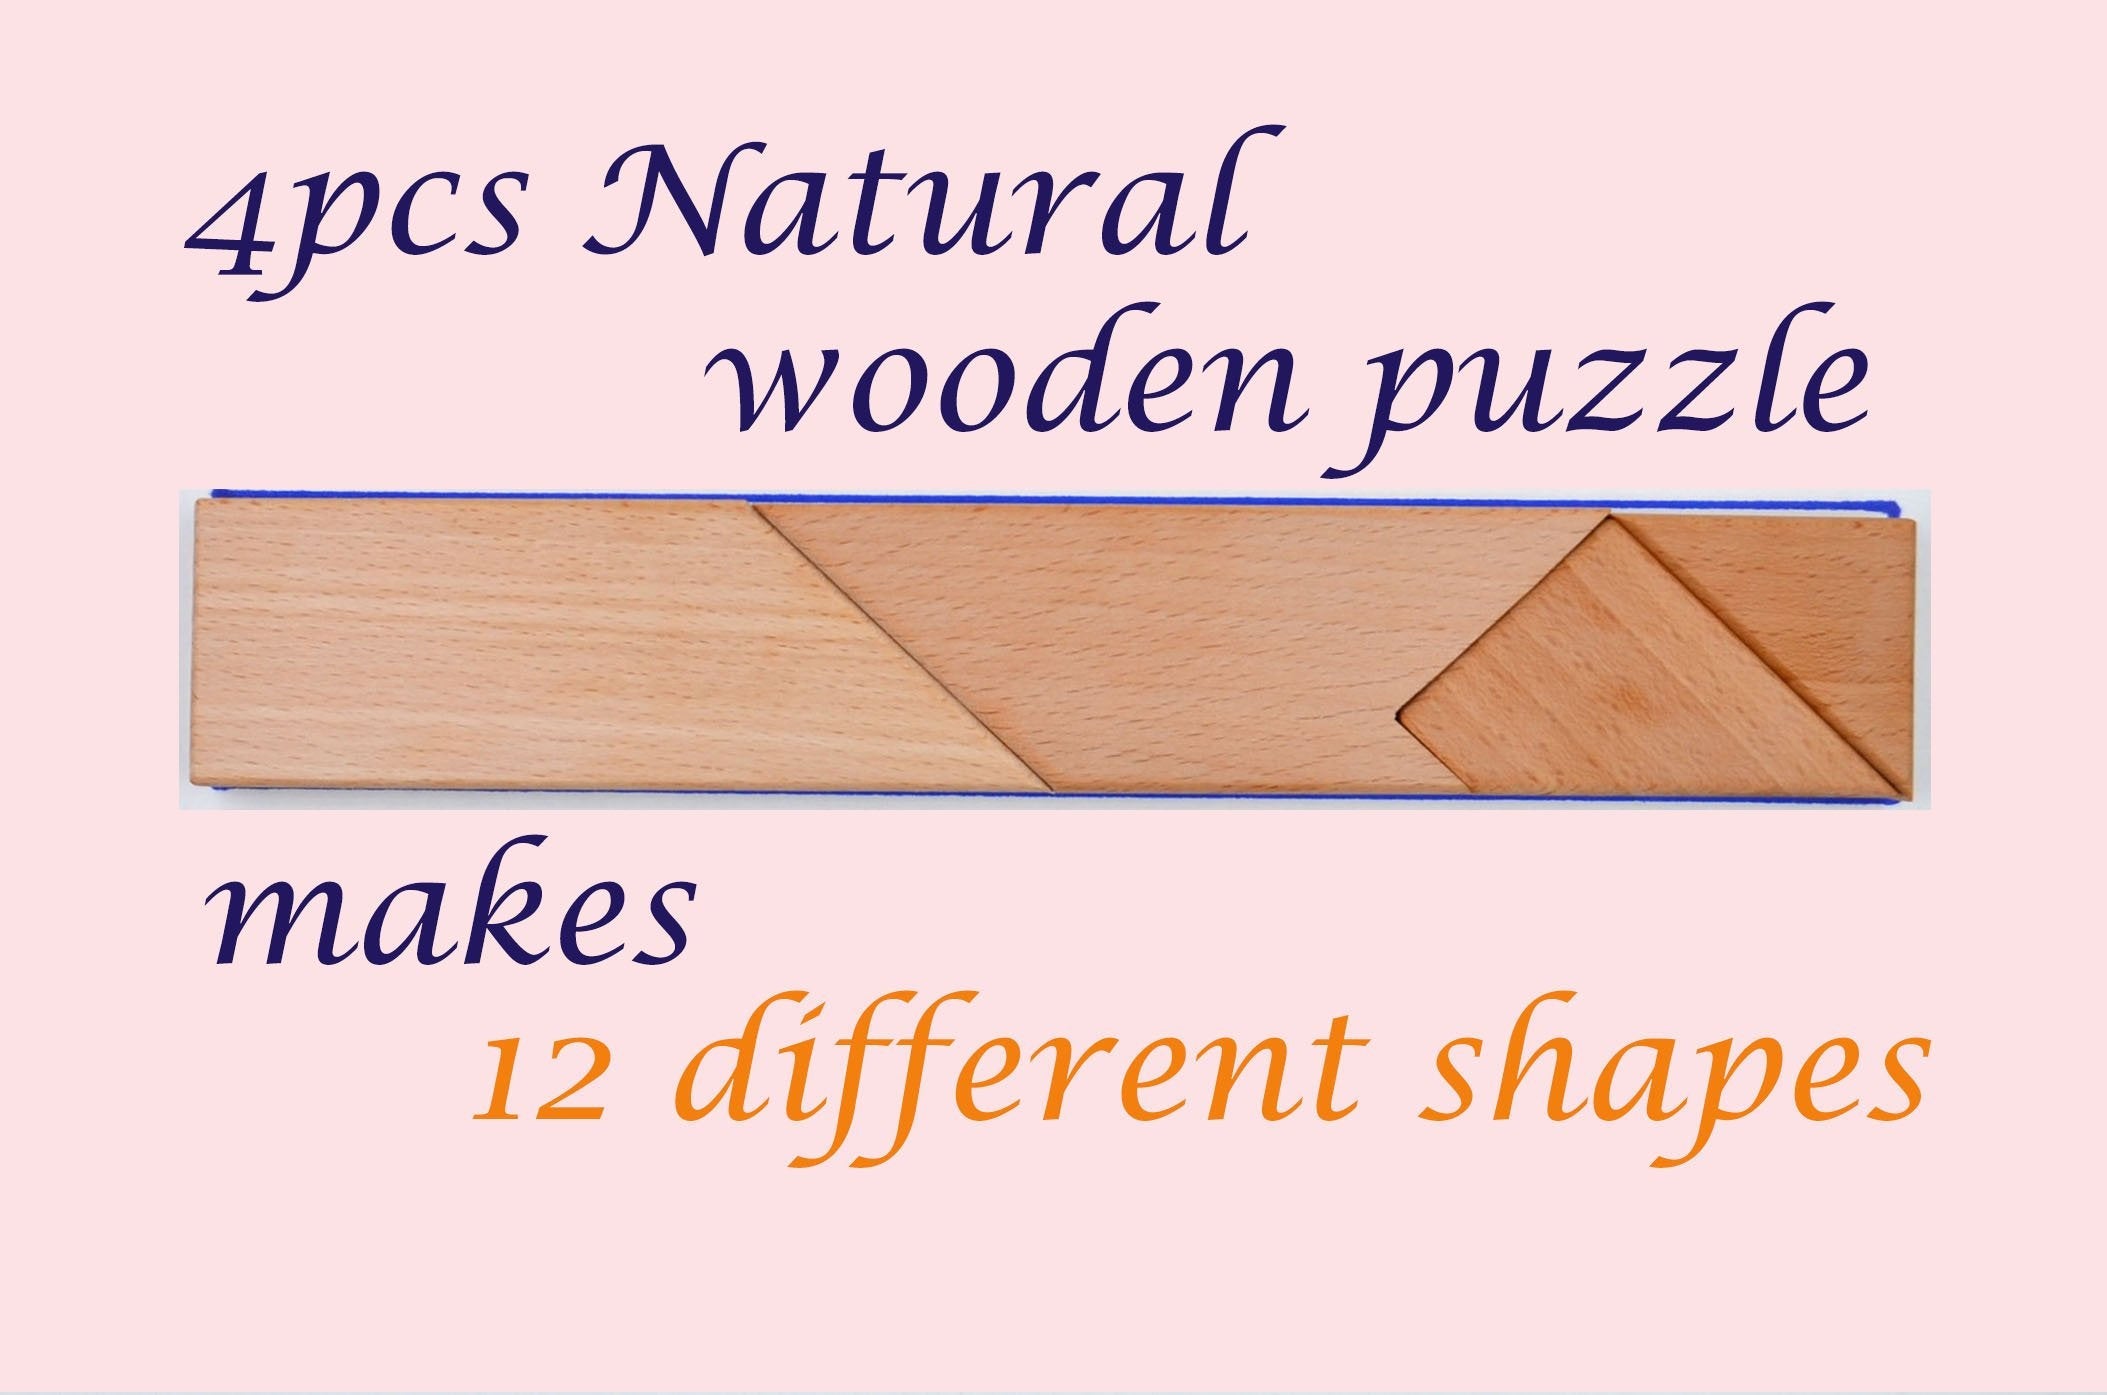 Natural wooden puzzle learning toy / brain teaser / birthday gift / puzzles tangram